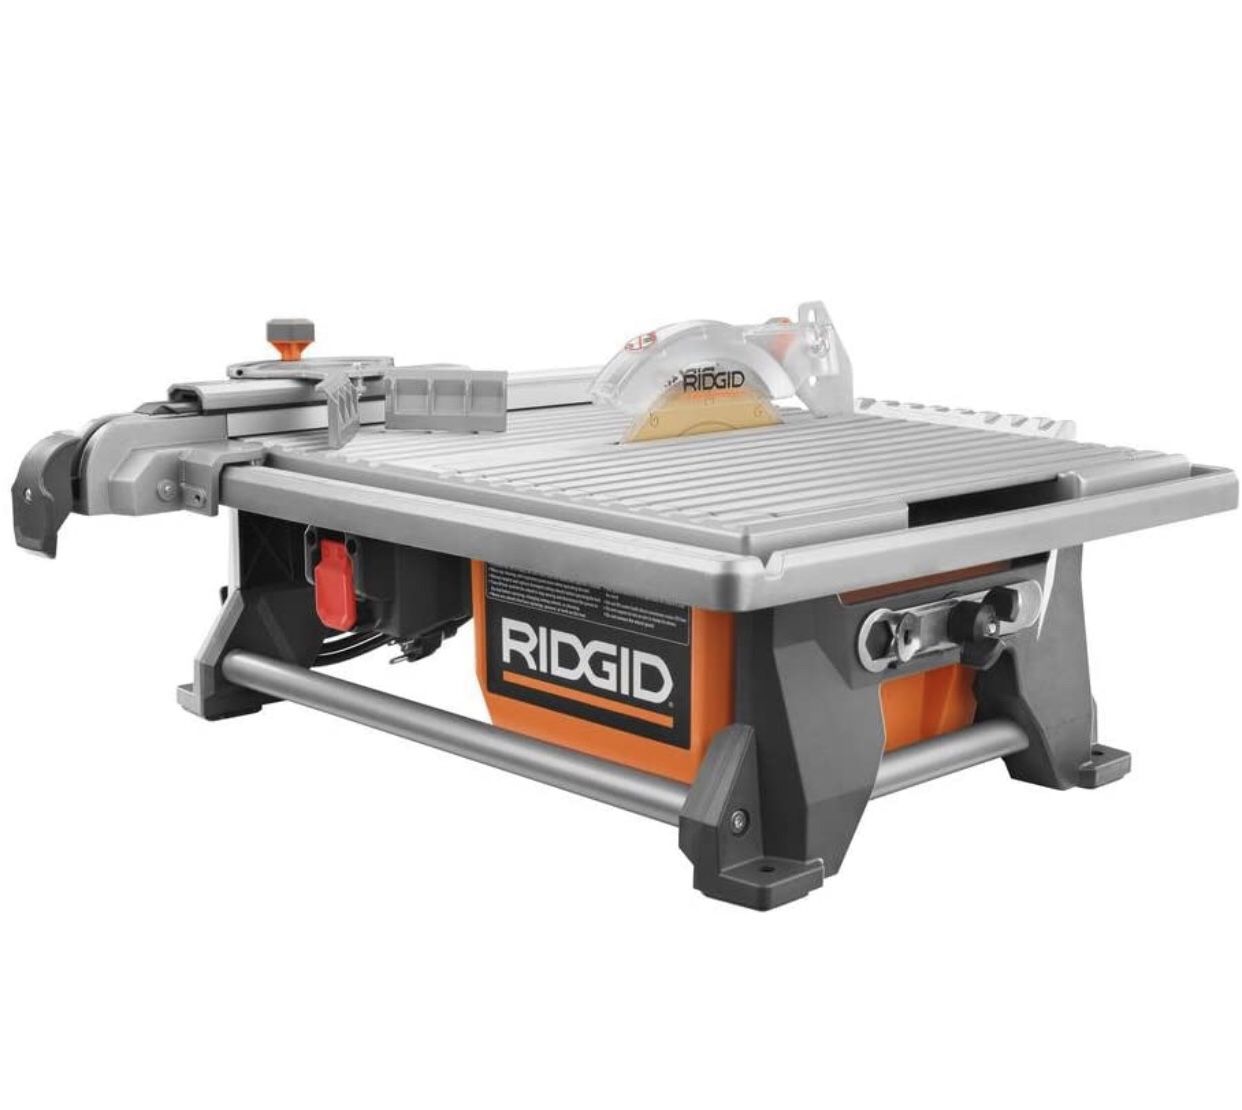 6.5 AMP RIGID 7 in. Table Top Wet Tile Saw